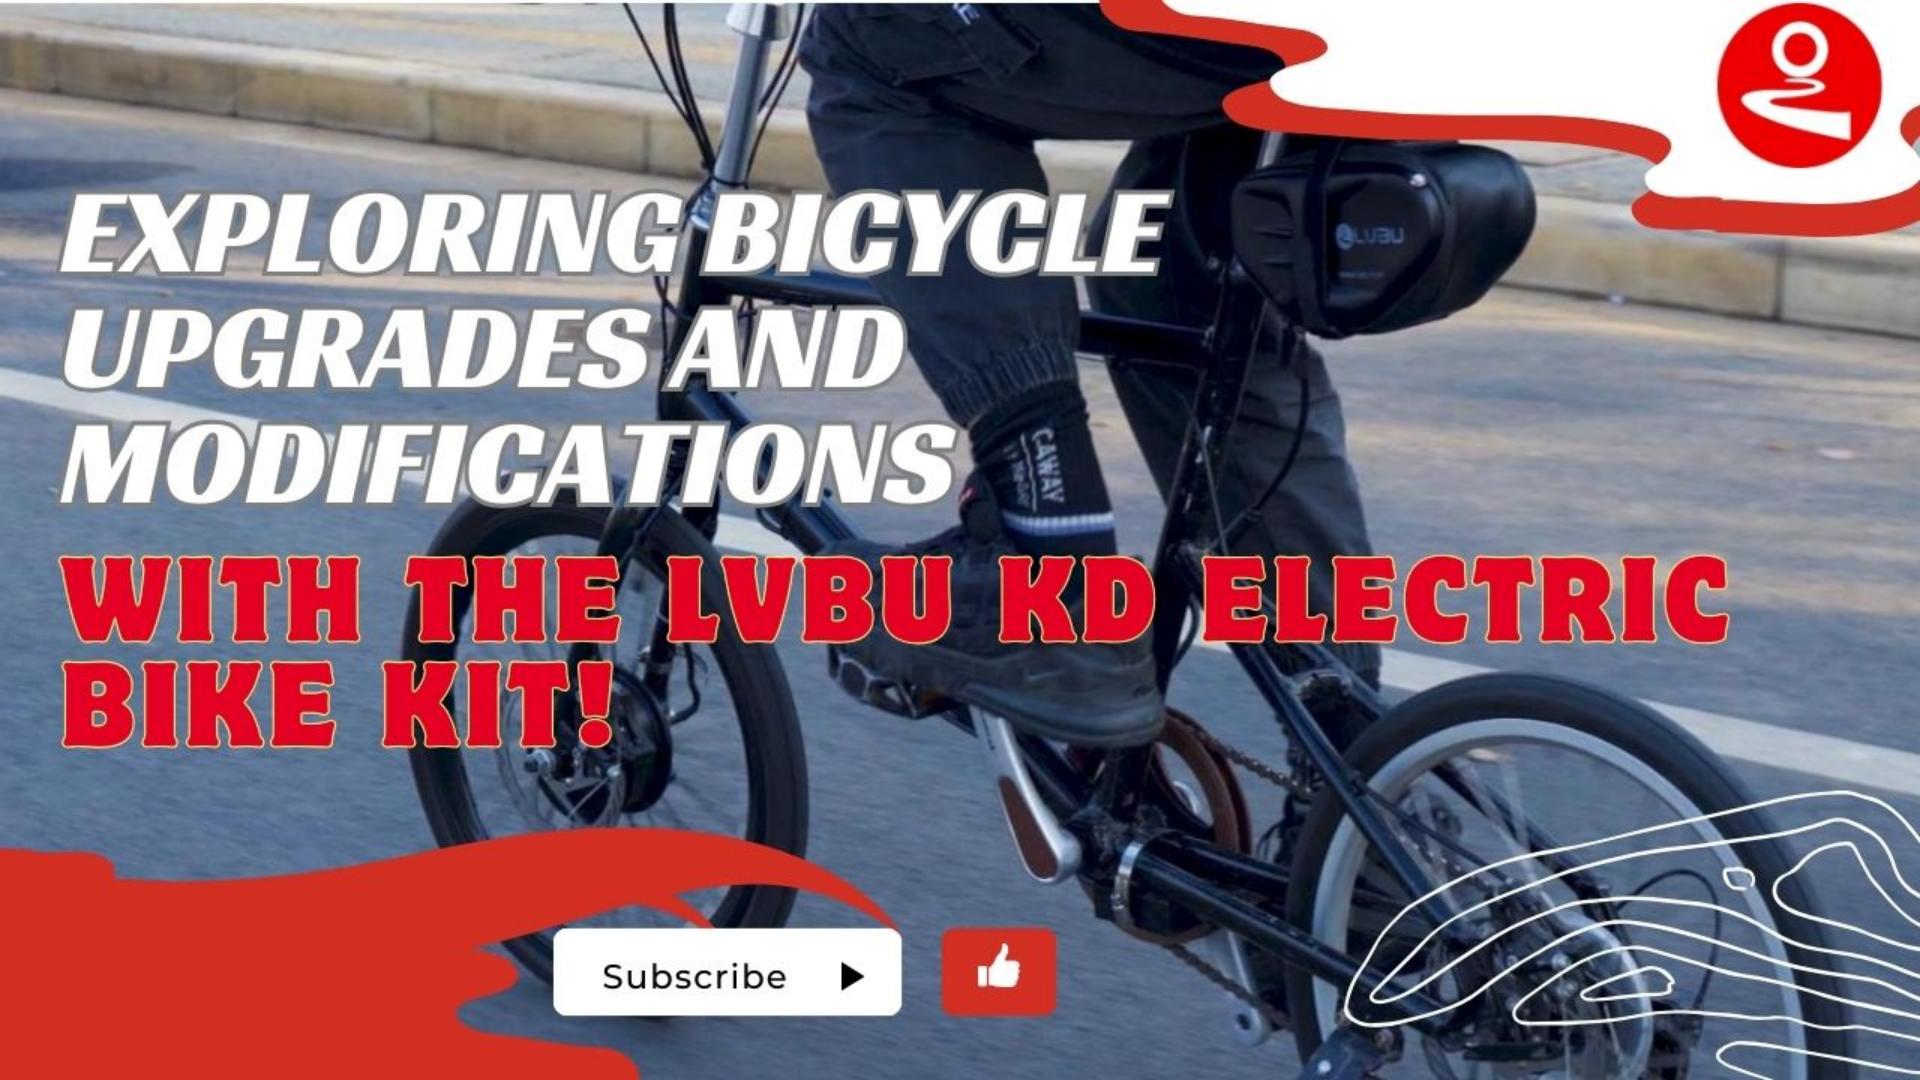 Exploring Bicycle Upgrades and Modifications with the Lvbu KD Electric Bike Kit